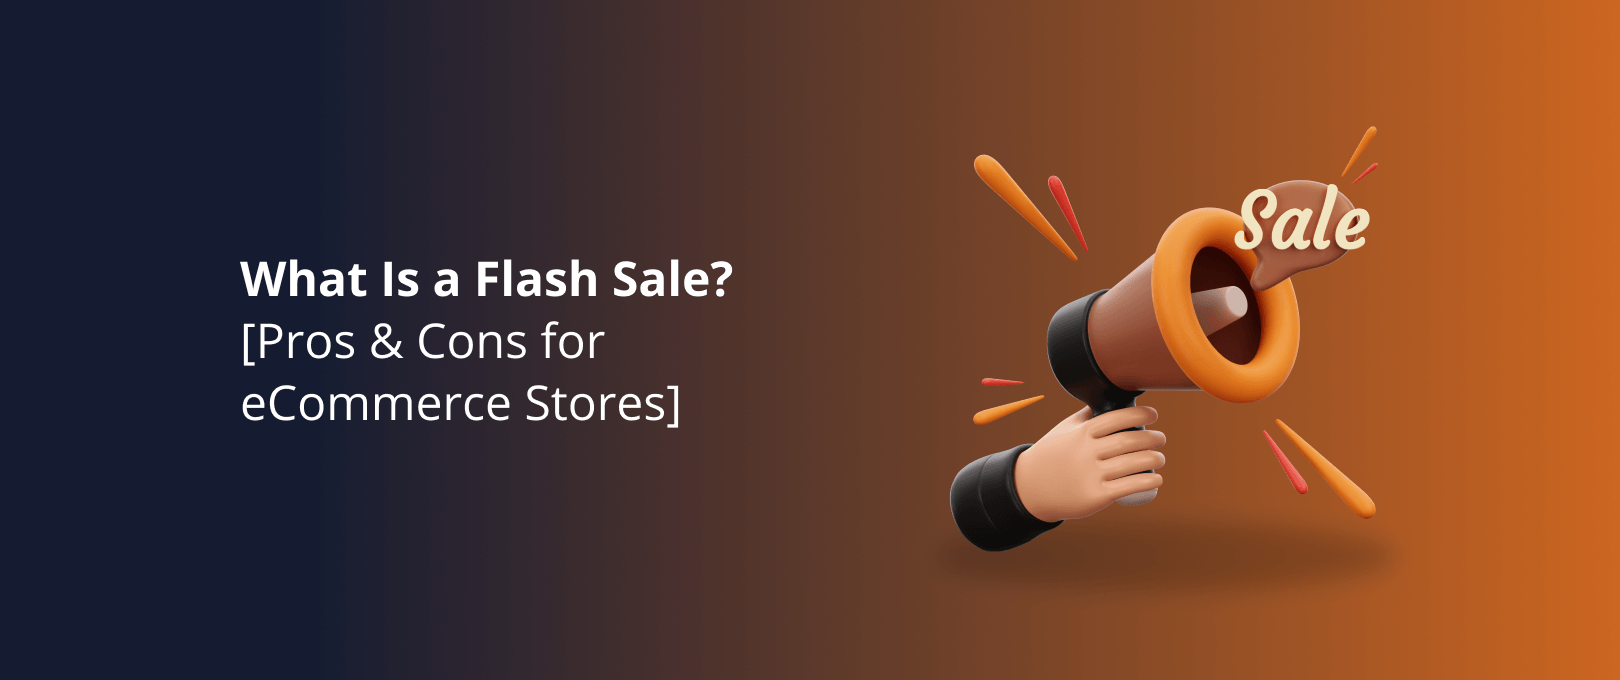 What is a Flash Sale: Your Ultimate eCommerce Guide